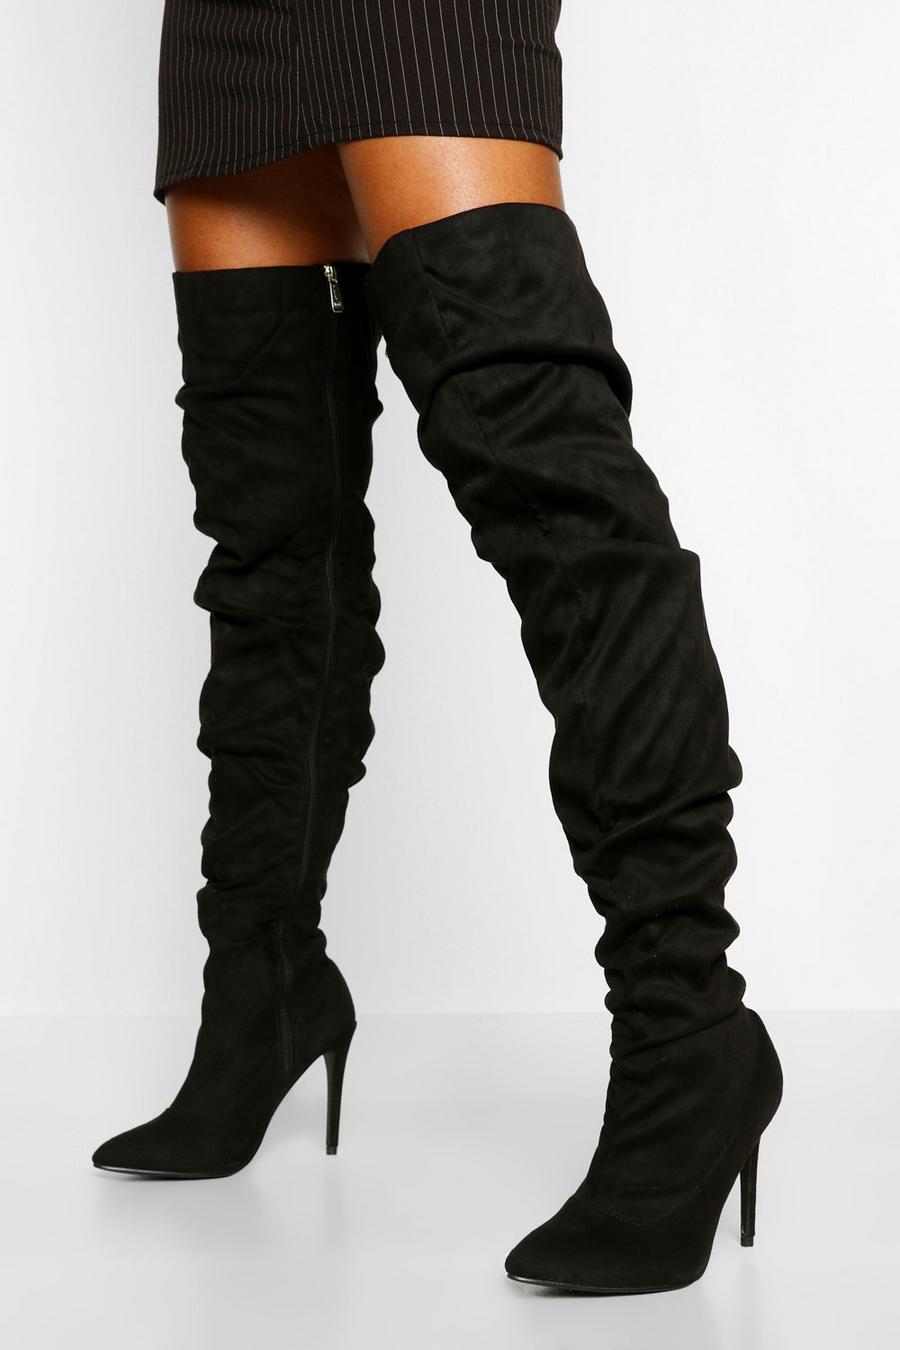 Black Slouched Stiletto Heel Thigh High Boots image number 1